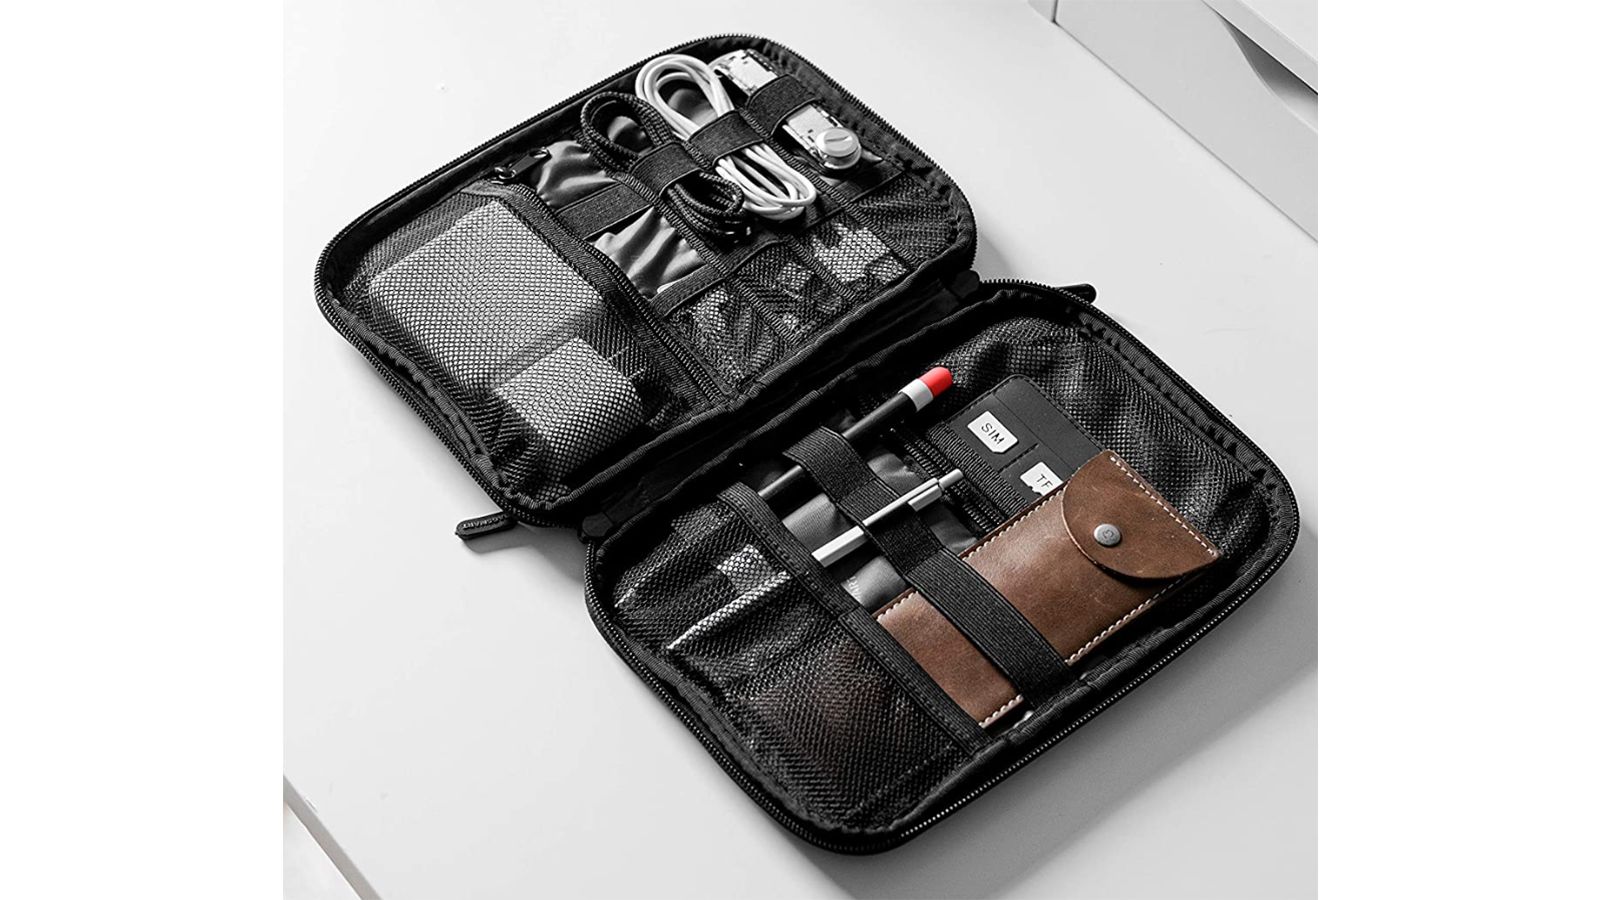 https://media.cnn.com/api/v1/images/stellar/prod/gifts-people-you-don-t-know-bagsmart-universal-cable-organizer-electronics-accessories-case.jpg?q=h_900,w_1601,x_0,y_0